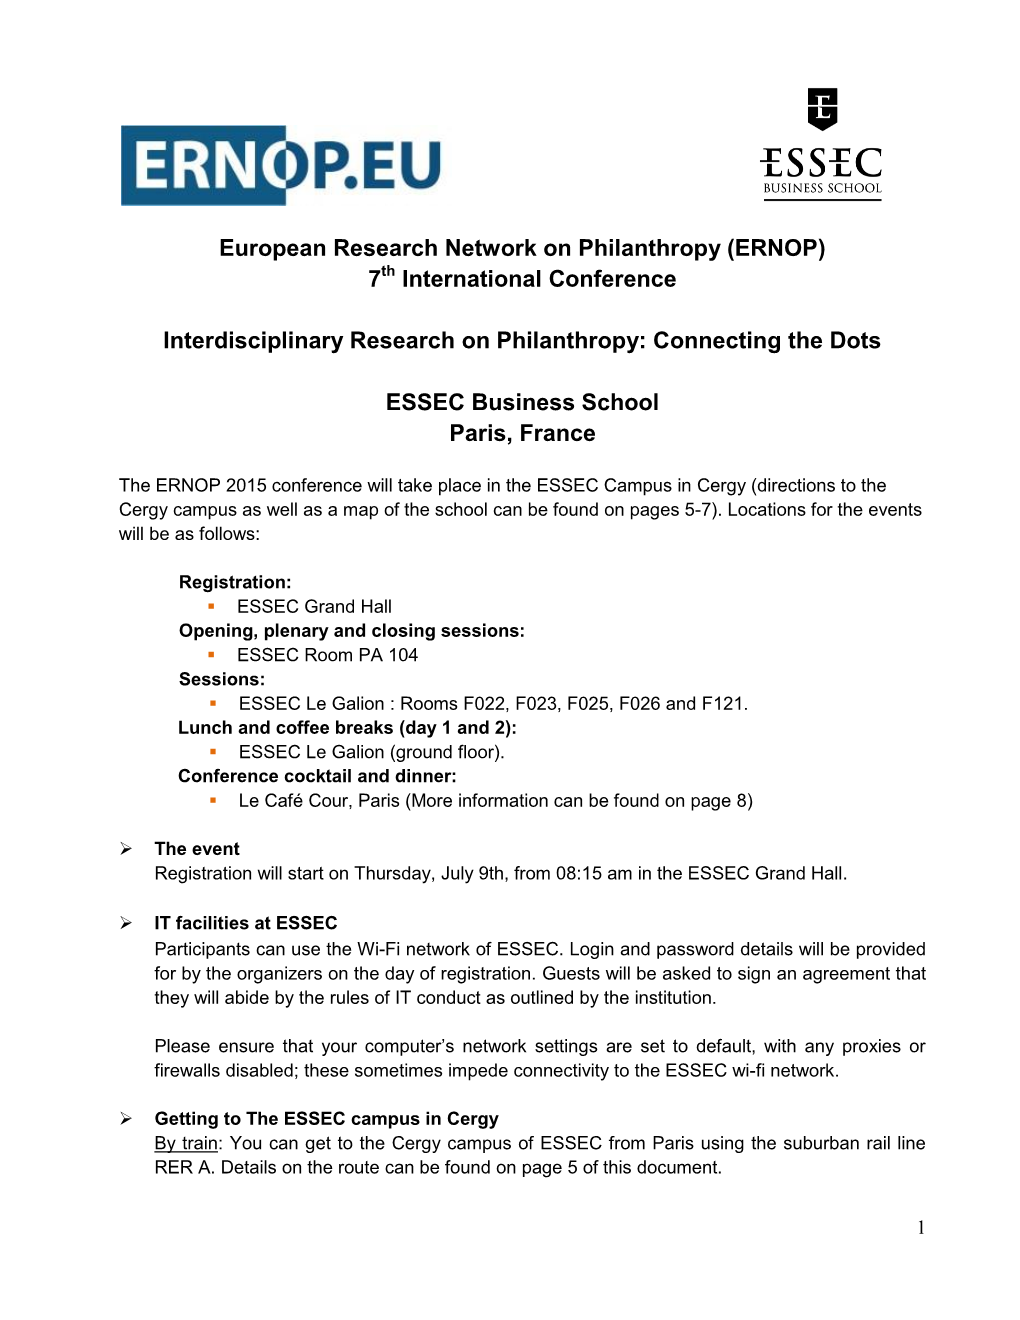 European Research Network on Philanthropy (ERNOP) 7Th International Conference